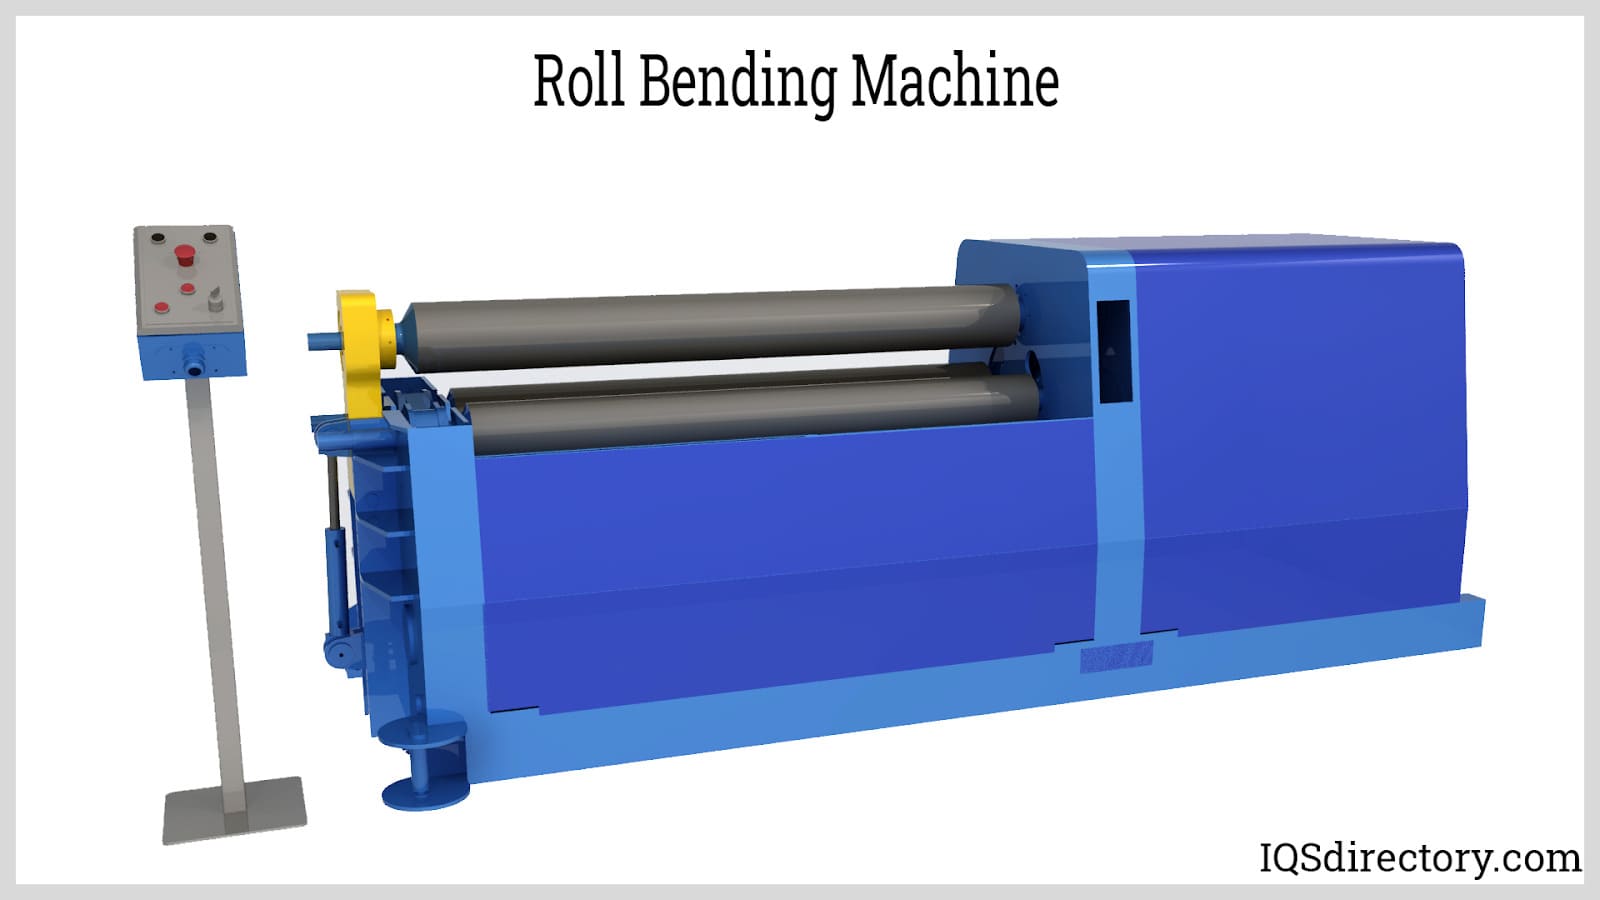 Making the case: Why convert a tube-bending machine from hydraulic